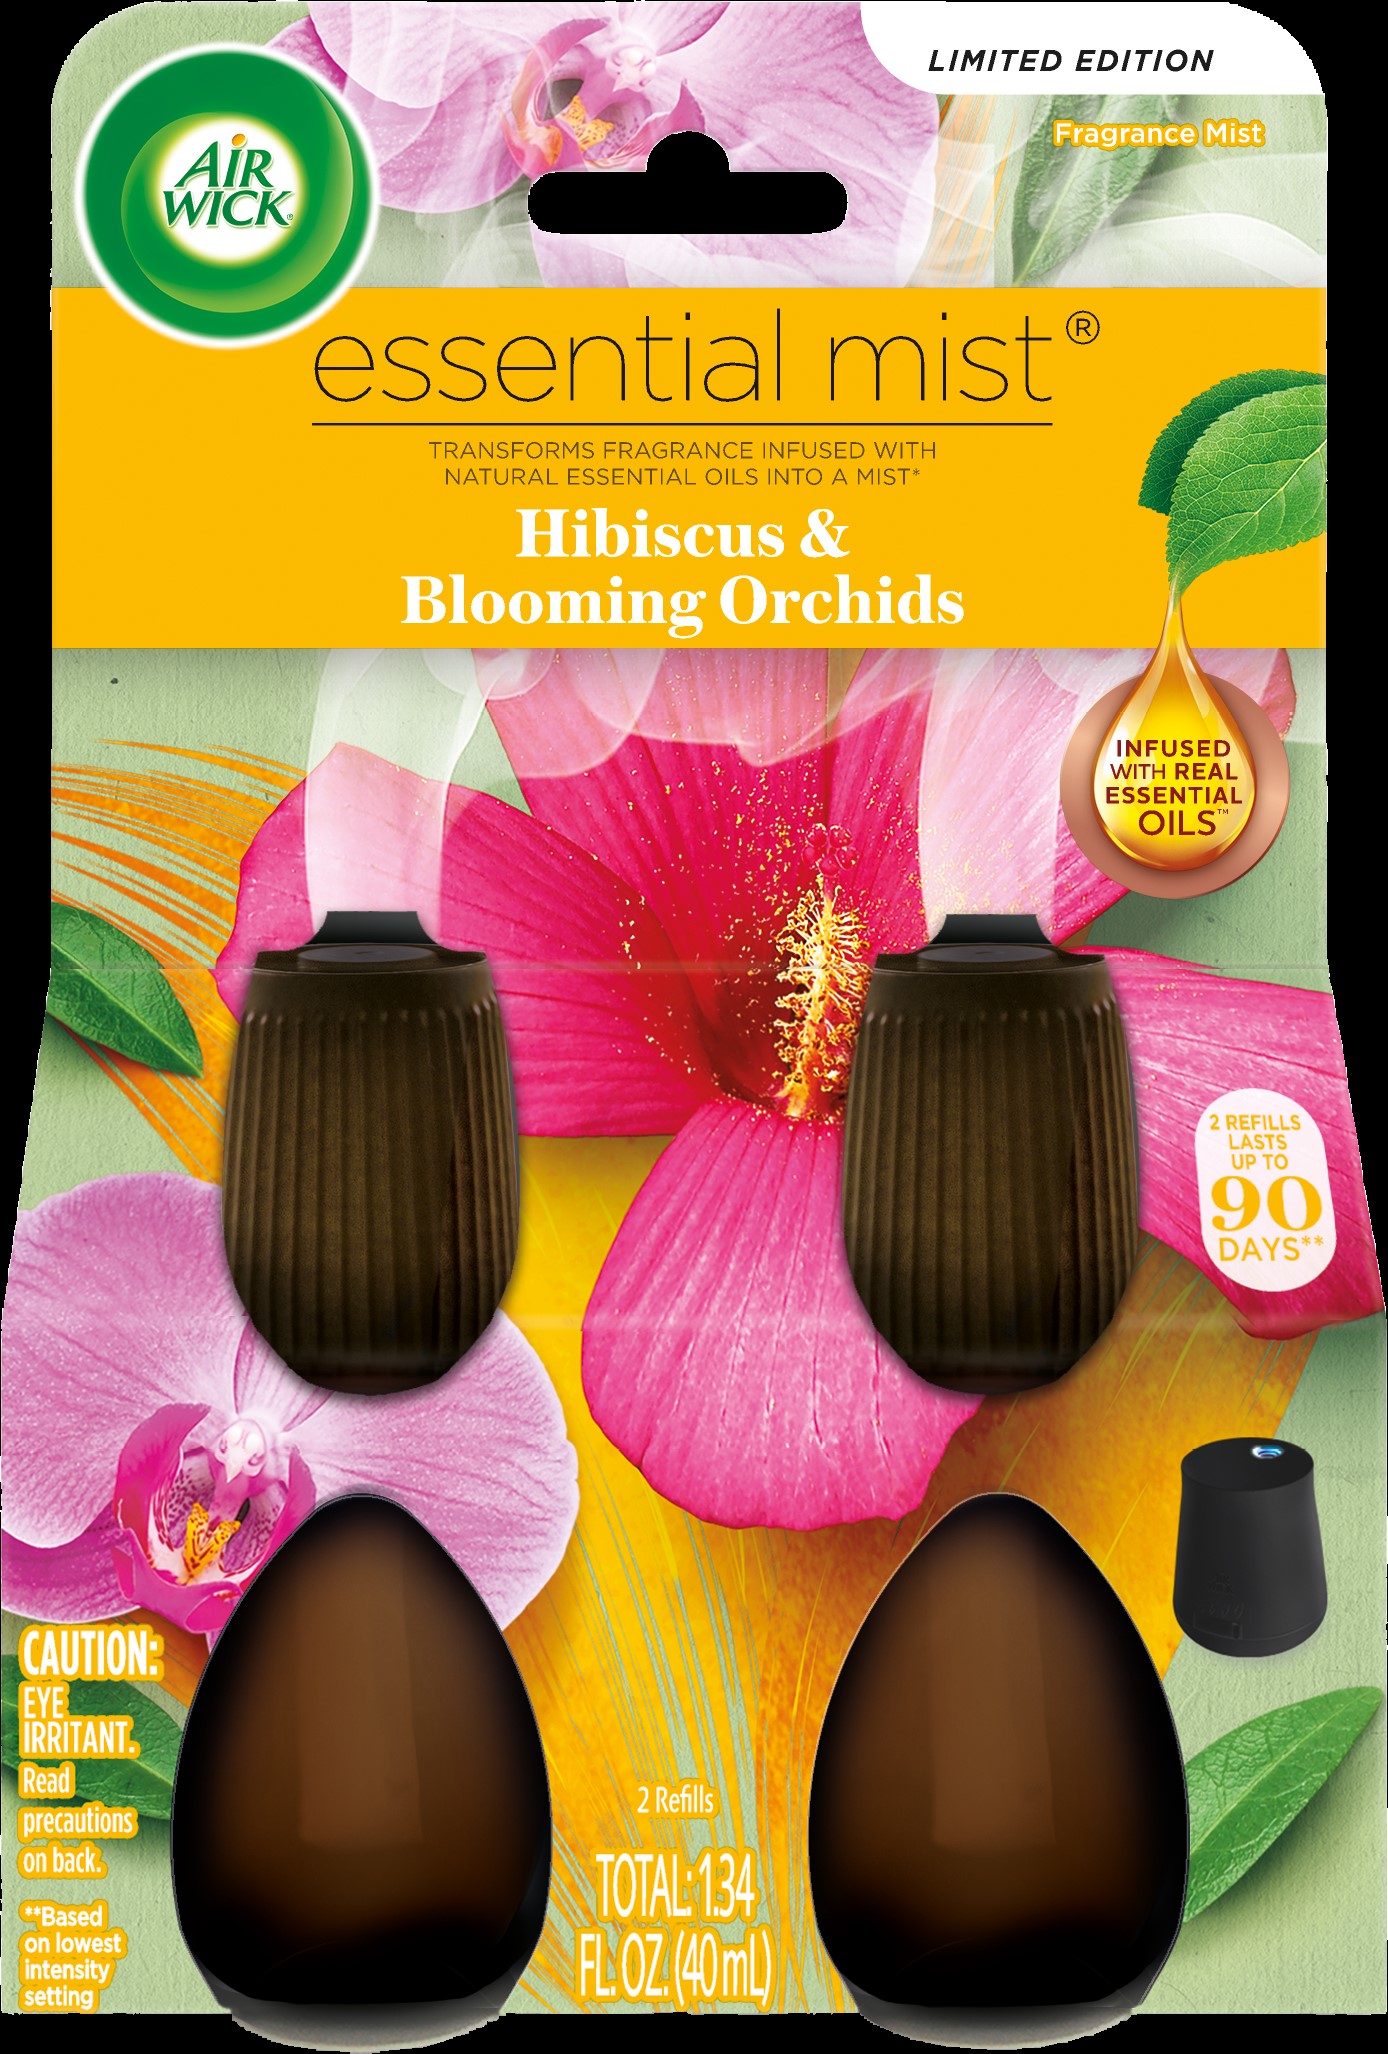 AIR WICK® Essential Mist - Hibiscus & Blooming Orchids